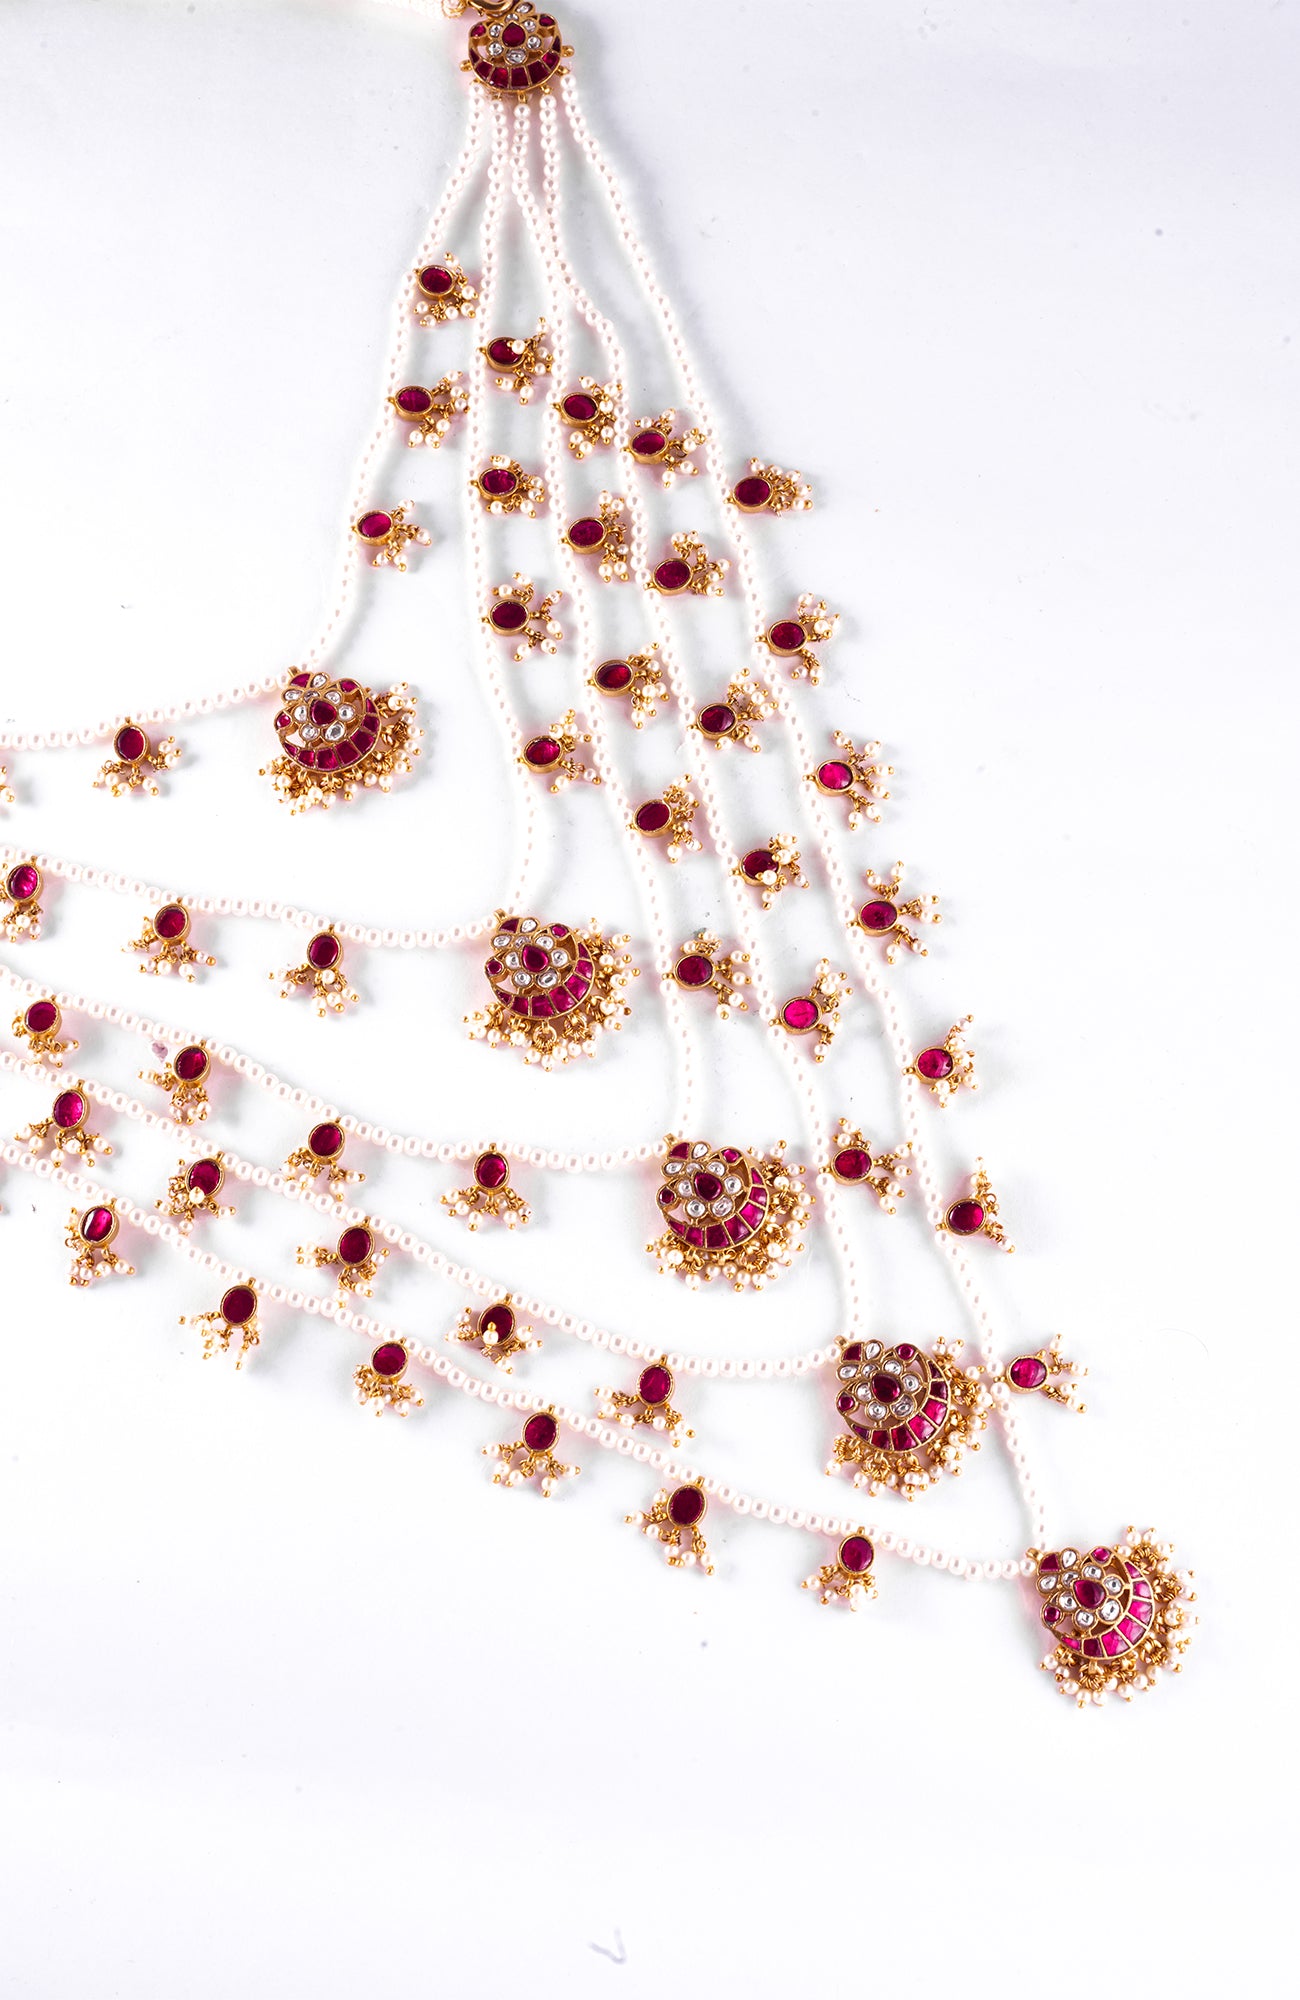 Ayesha Panchlada Necklace Set in Red